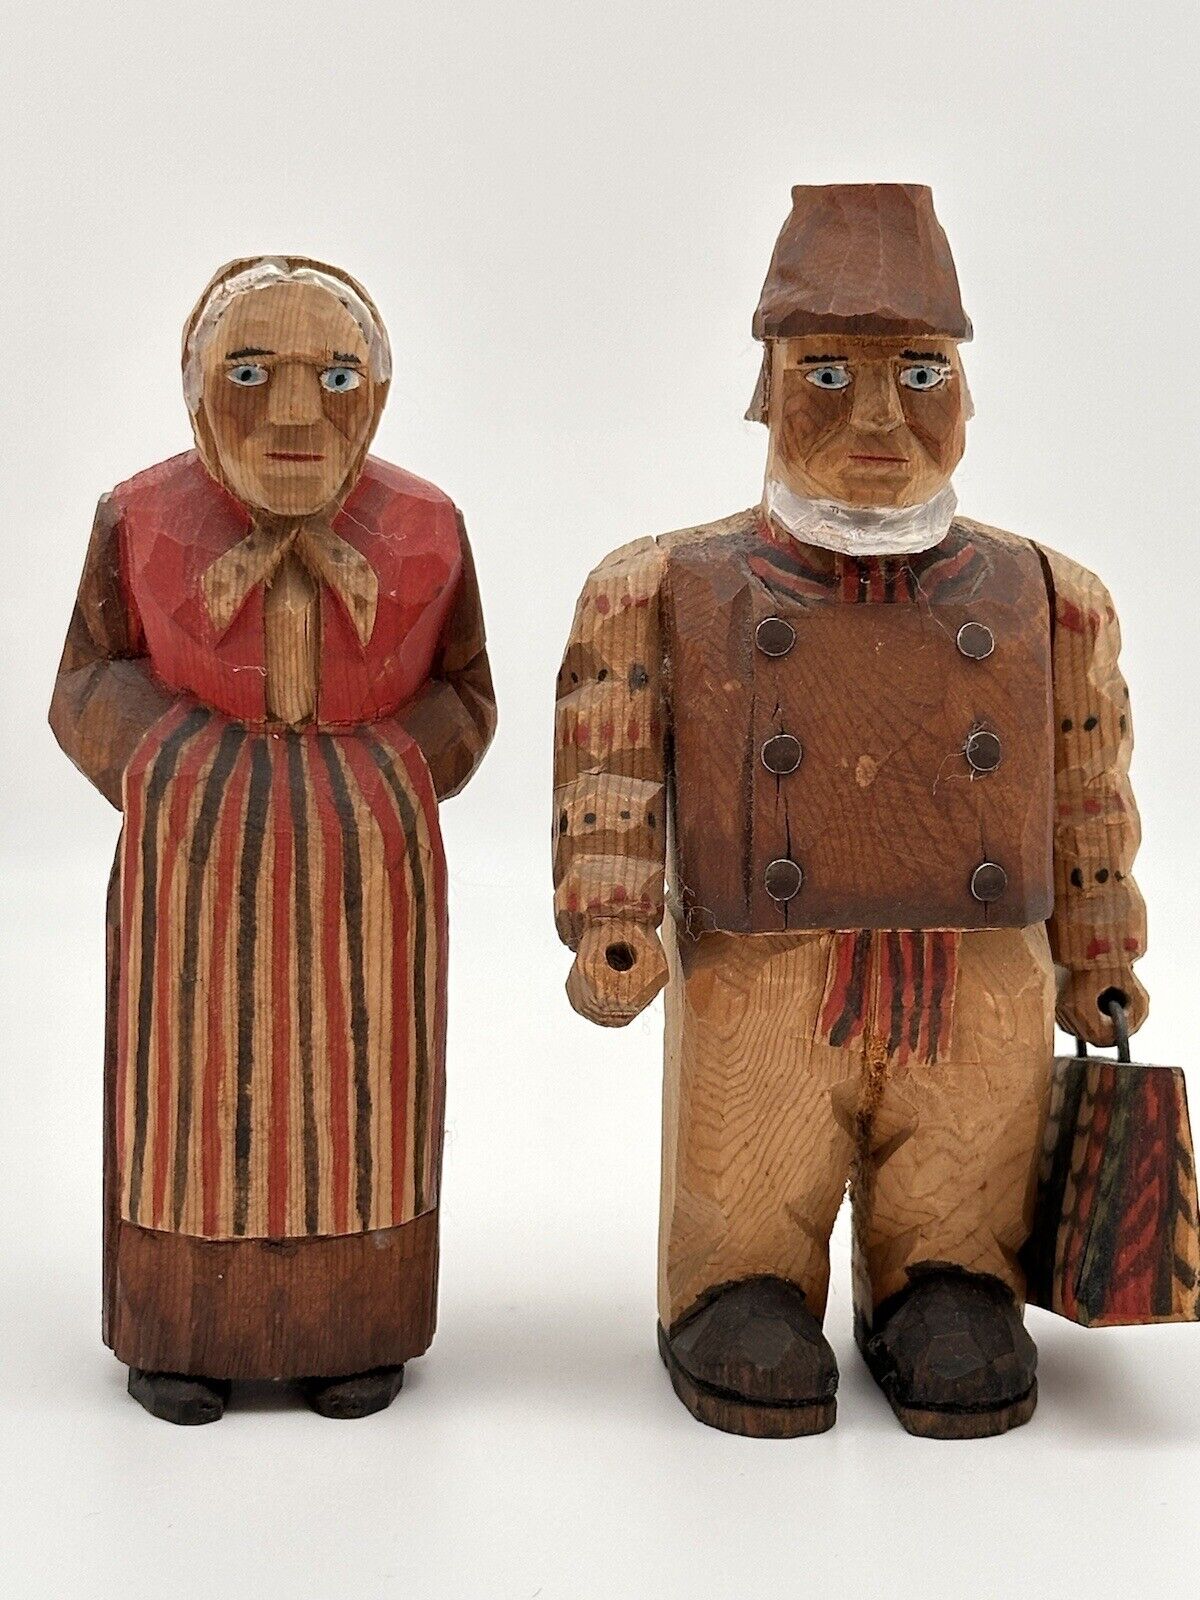 Swedish Carved Hand Painted Wood Figurines Traditional Folk Art Pieces 1940s-50s